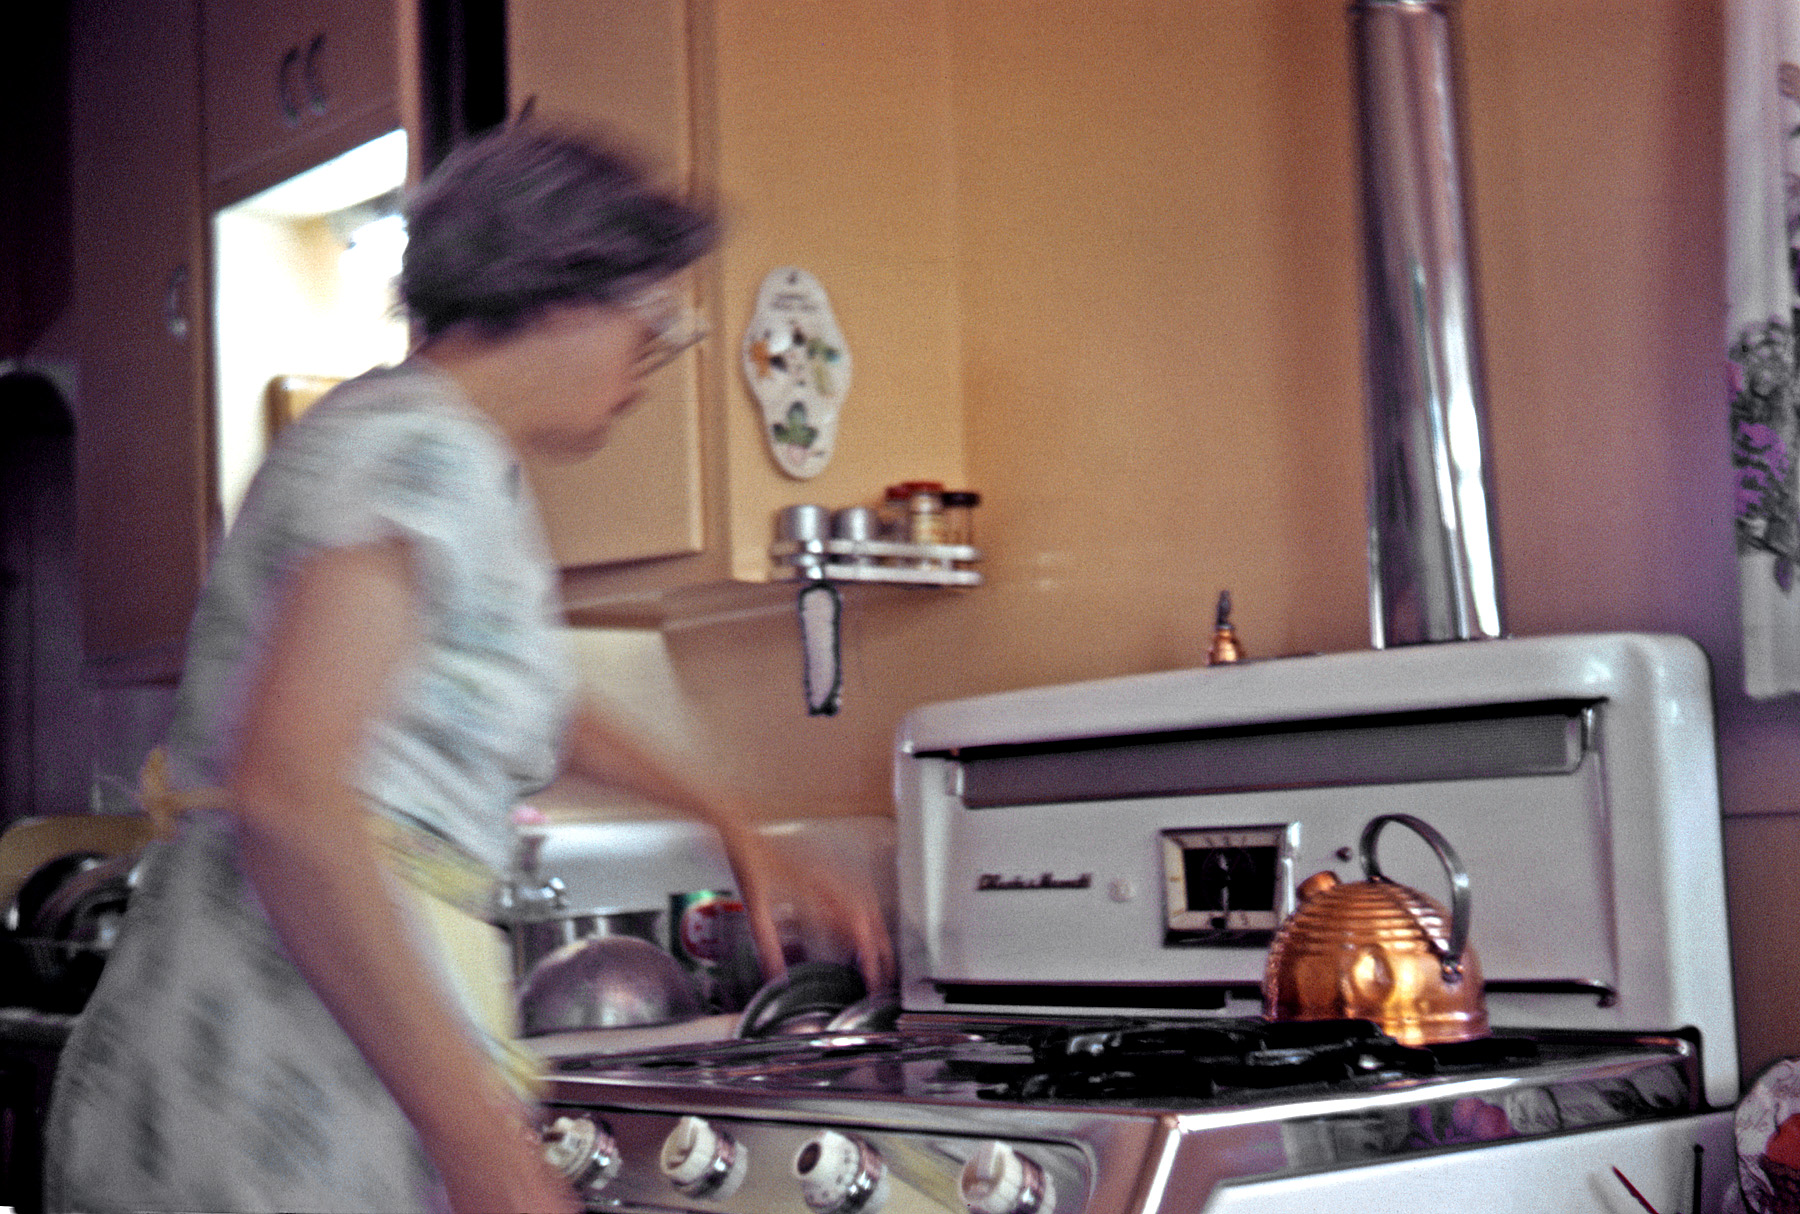 July 1964. My mother is a blur of activity in this available light Kodachrome; judging from the grates piled up on the right front burner, she's cleaning the O'Keefe & Merritt's chrome top. View full size.